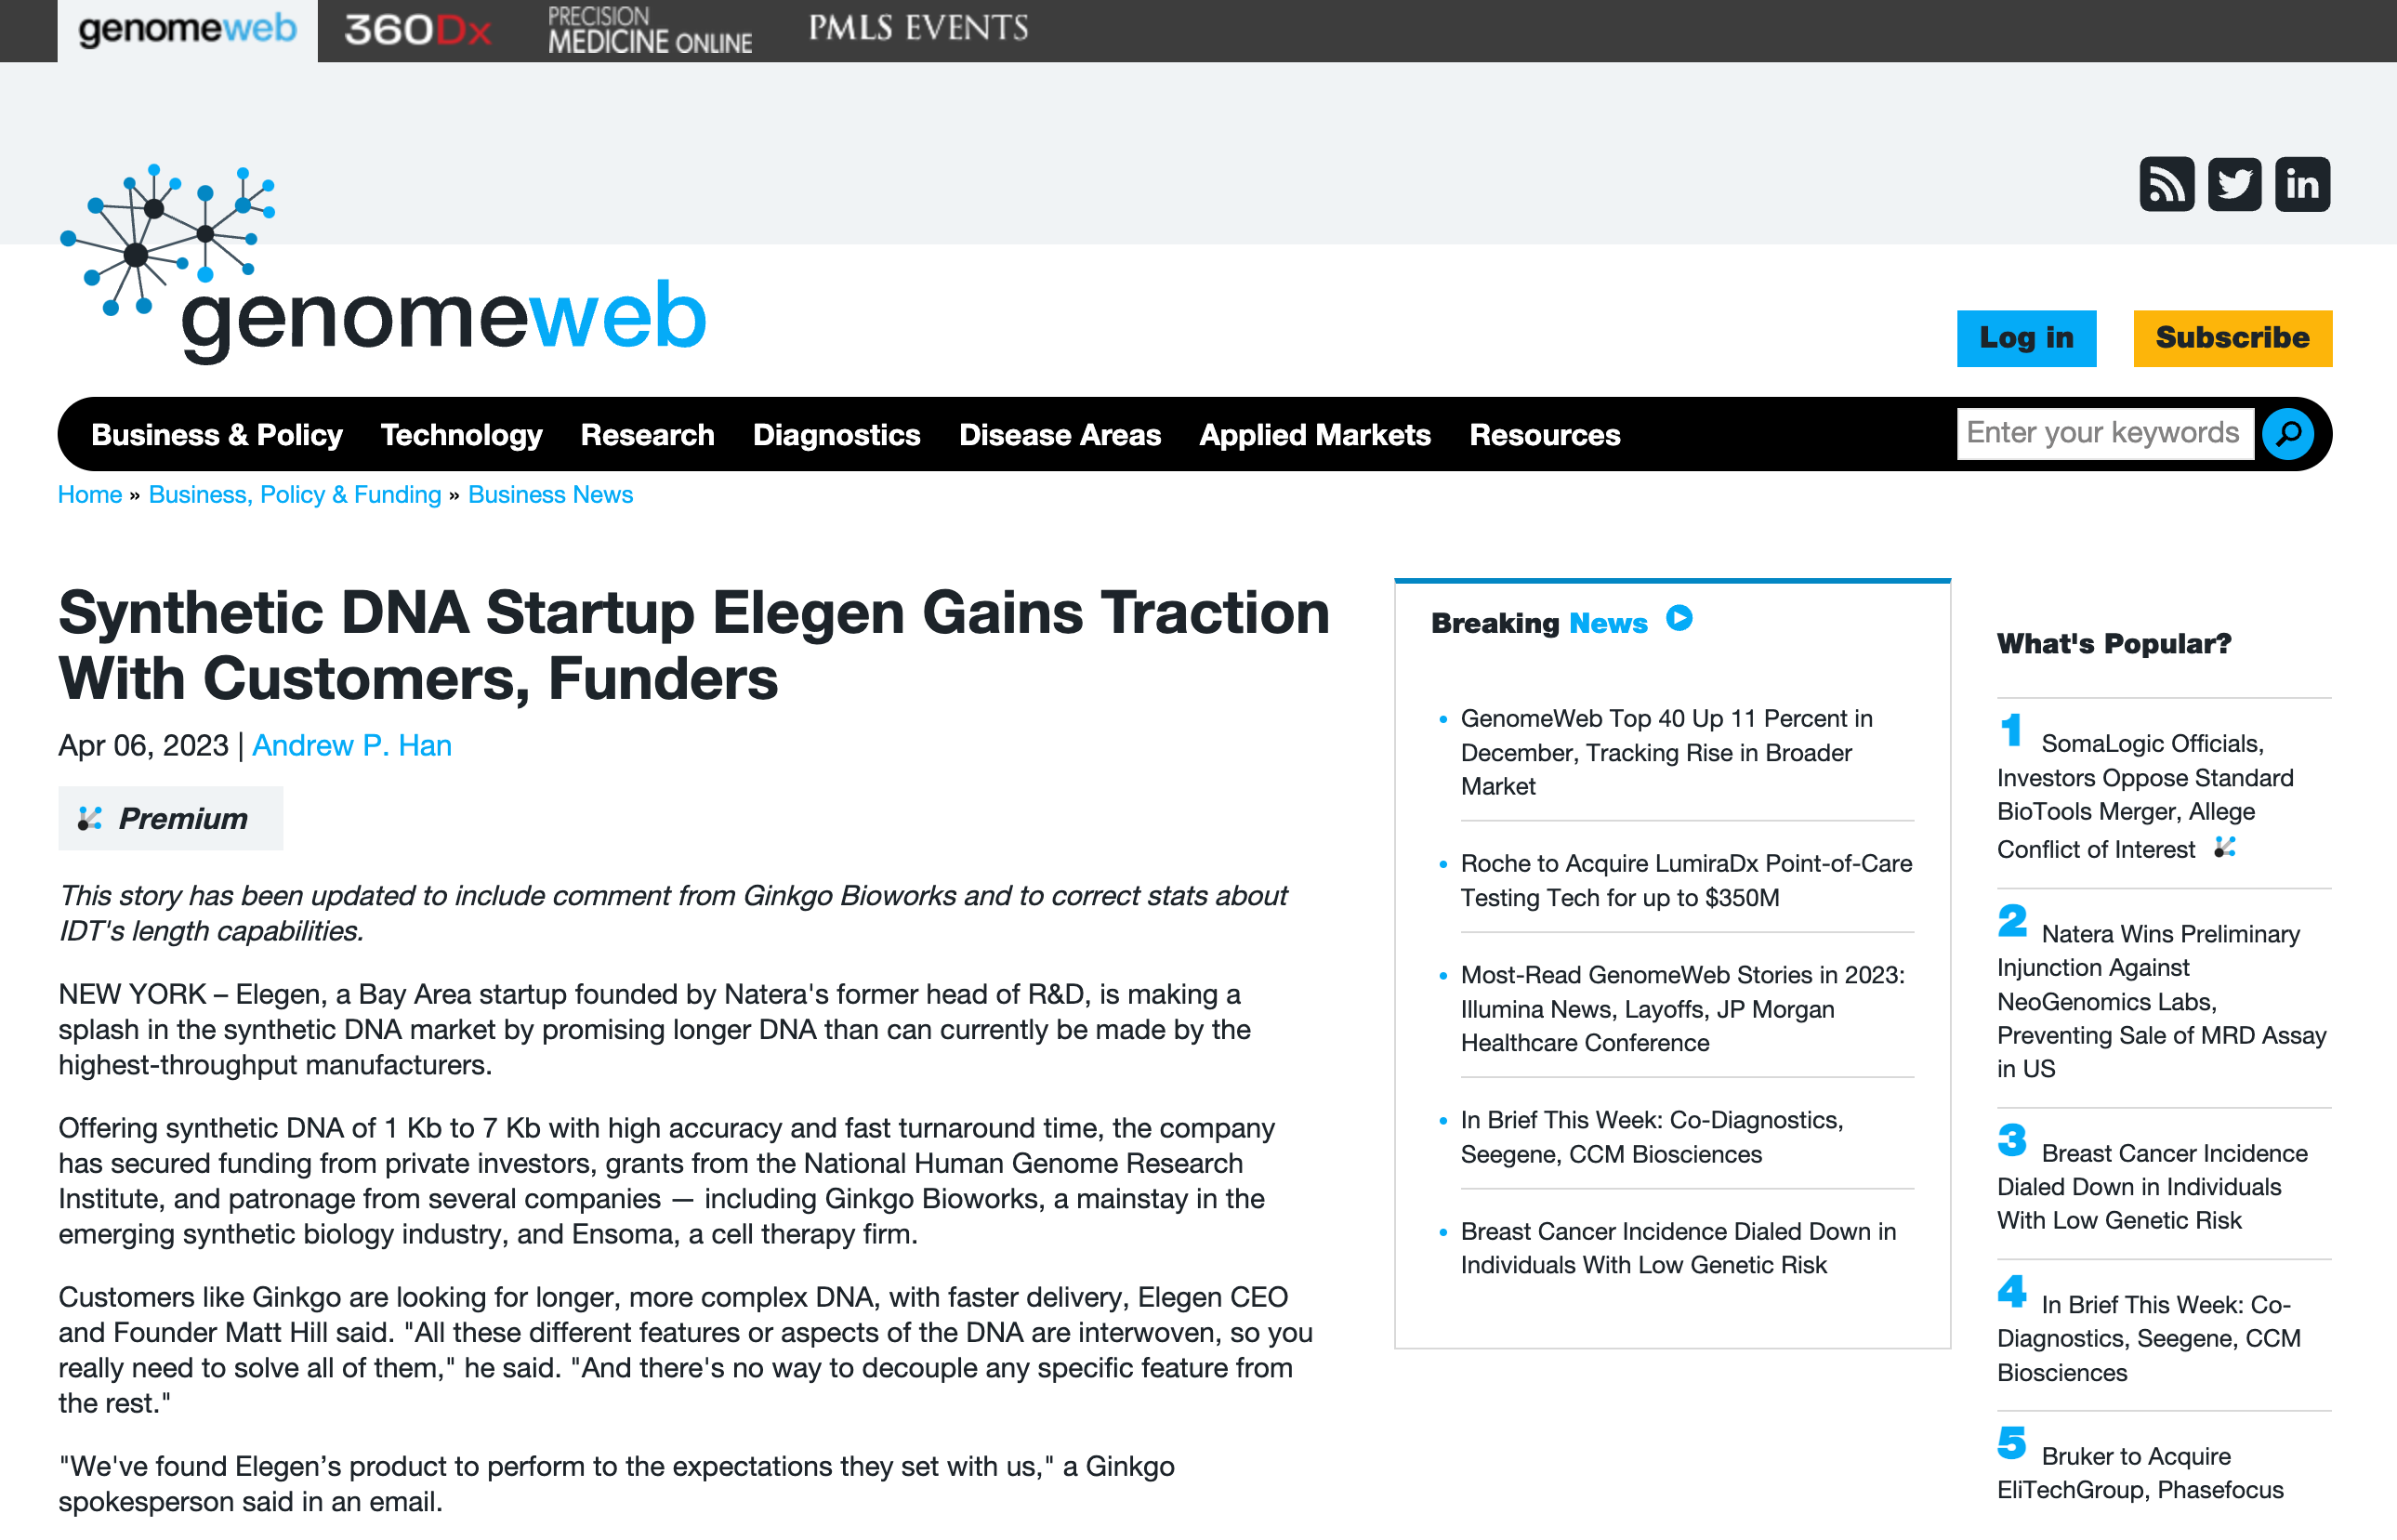 Synthetic DNA Startup Elegen Gains Traction With Customers, Funders